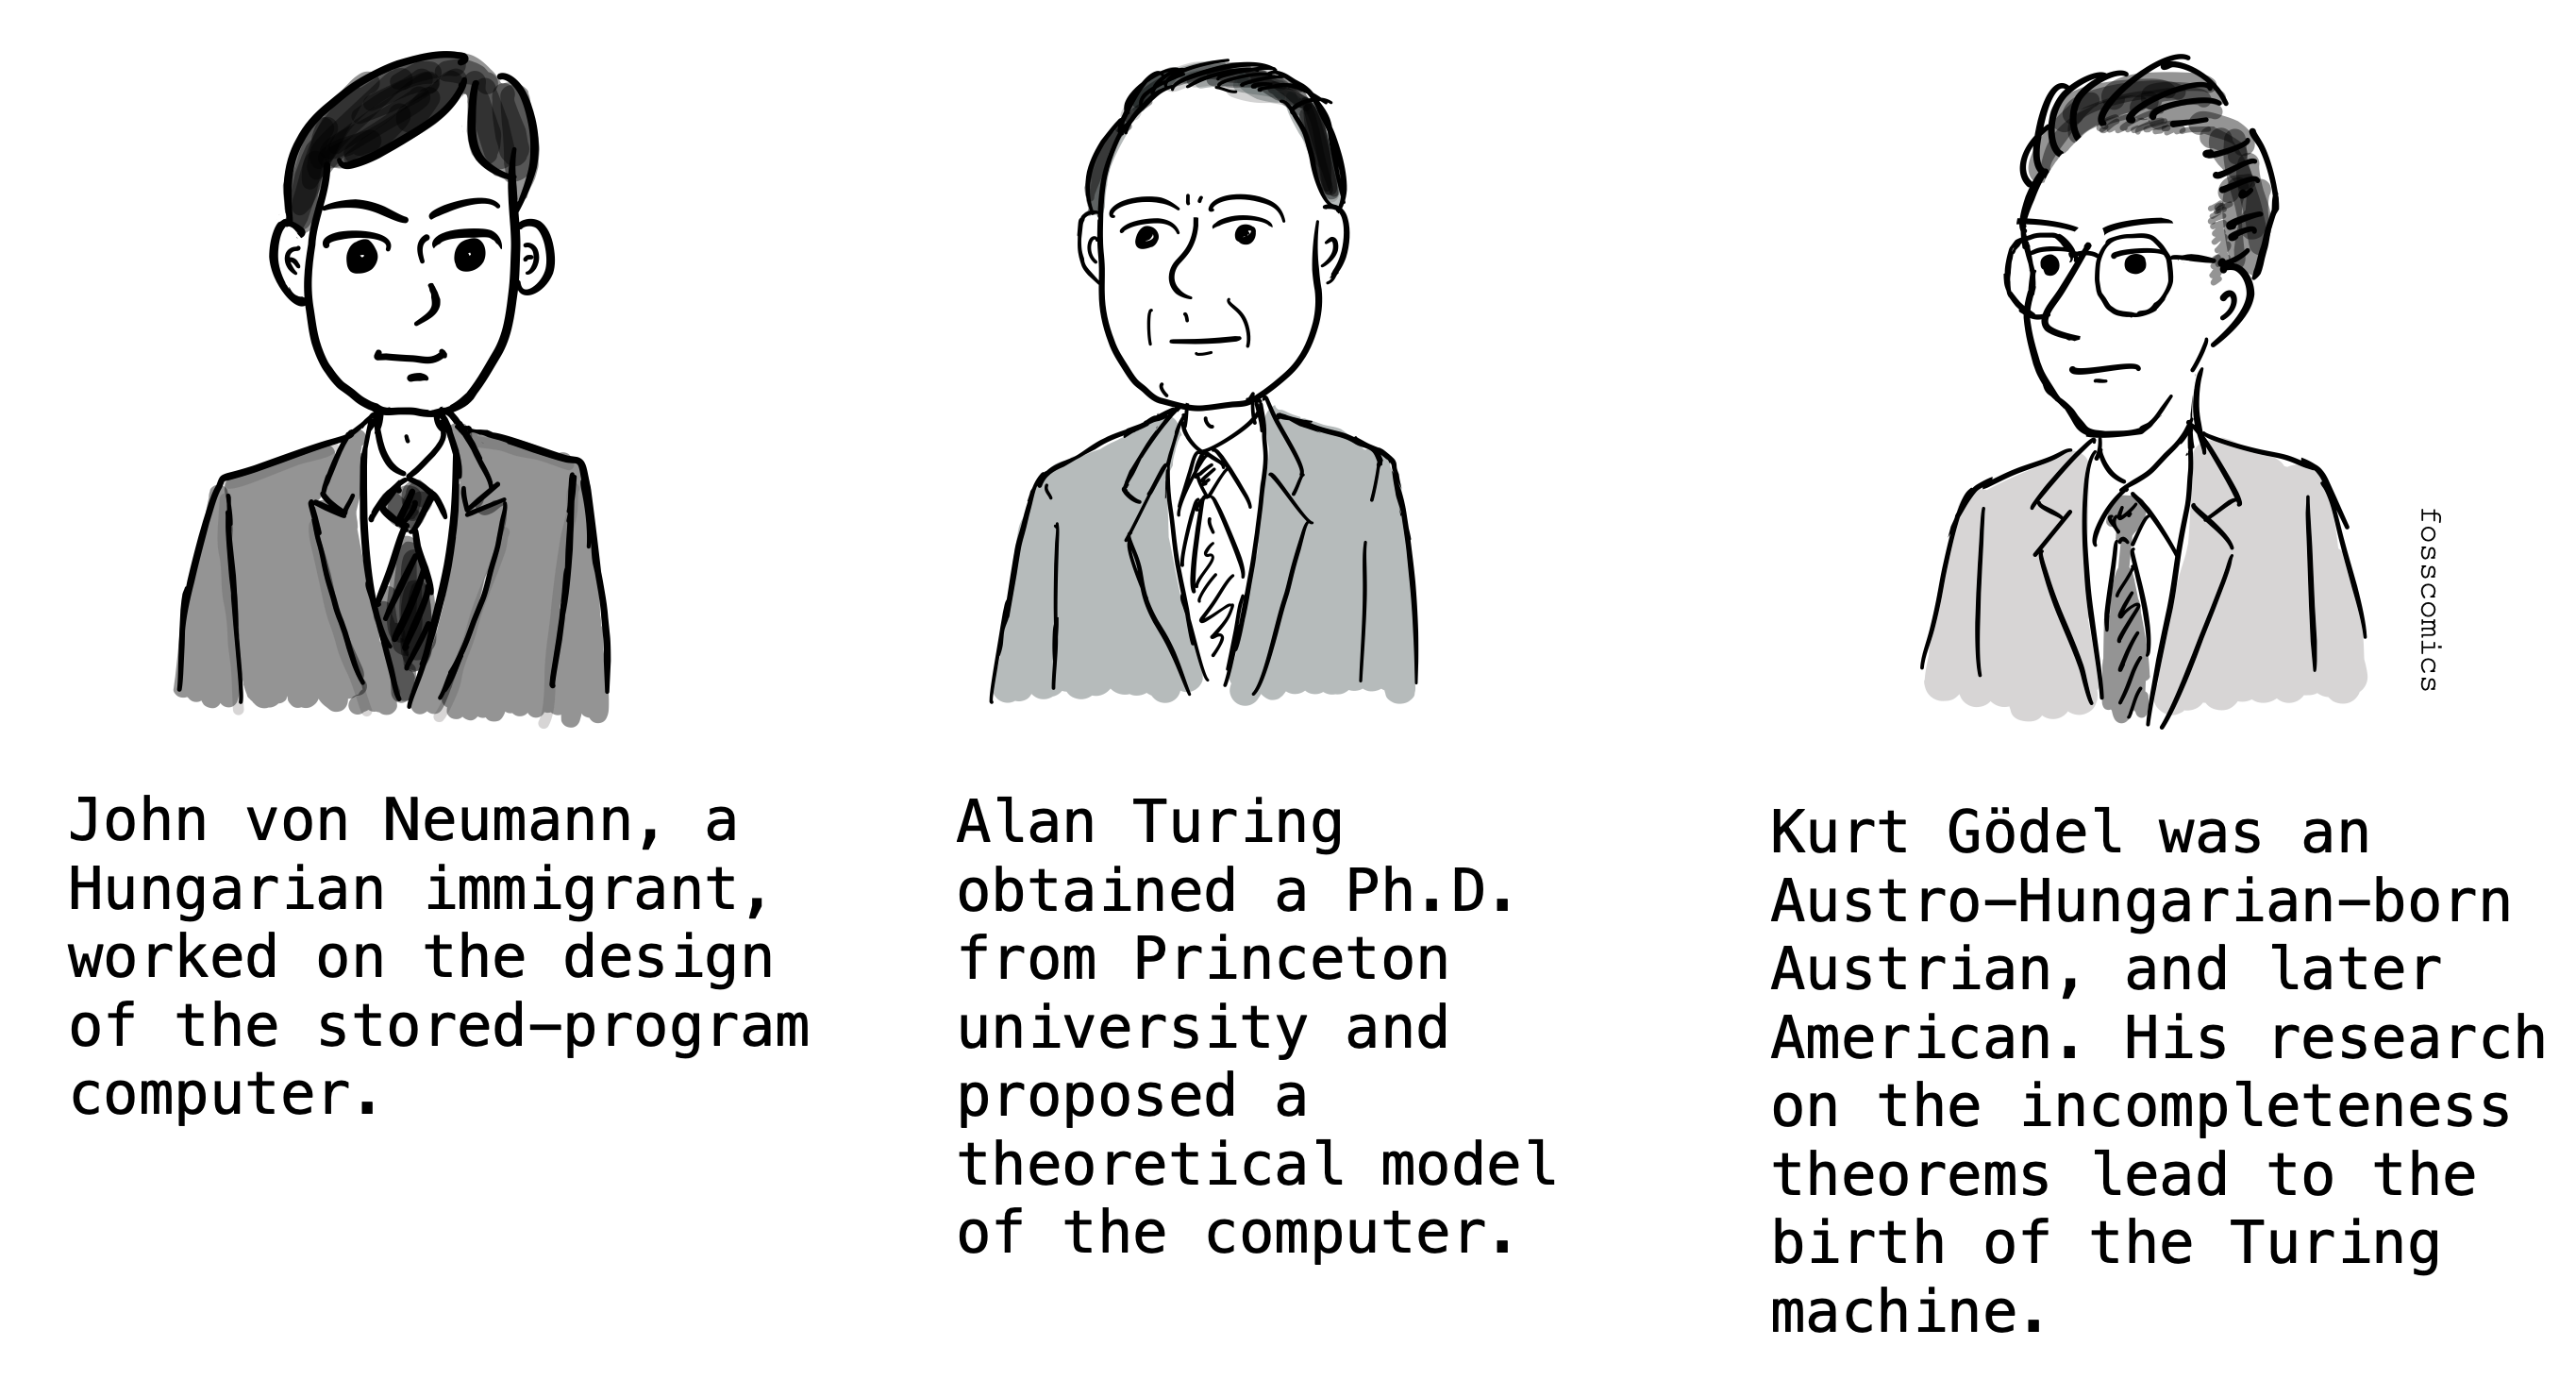 Von Neumann, a Hungarian immigrant, worked on the design of the stored-program computer. Alan Turing obtained a Ph.D. from Princeton university and proposed a theoretical model of the computer. Kurt Gödel was an Austro-Hungarian-born Austrian, and later American. His research on the incompleteness theorems led to the birth of the Turing machine.